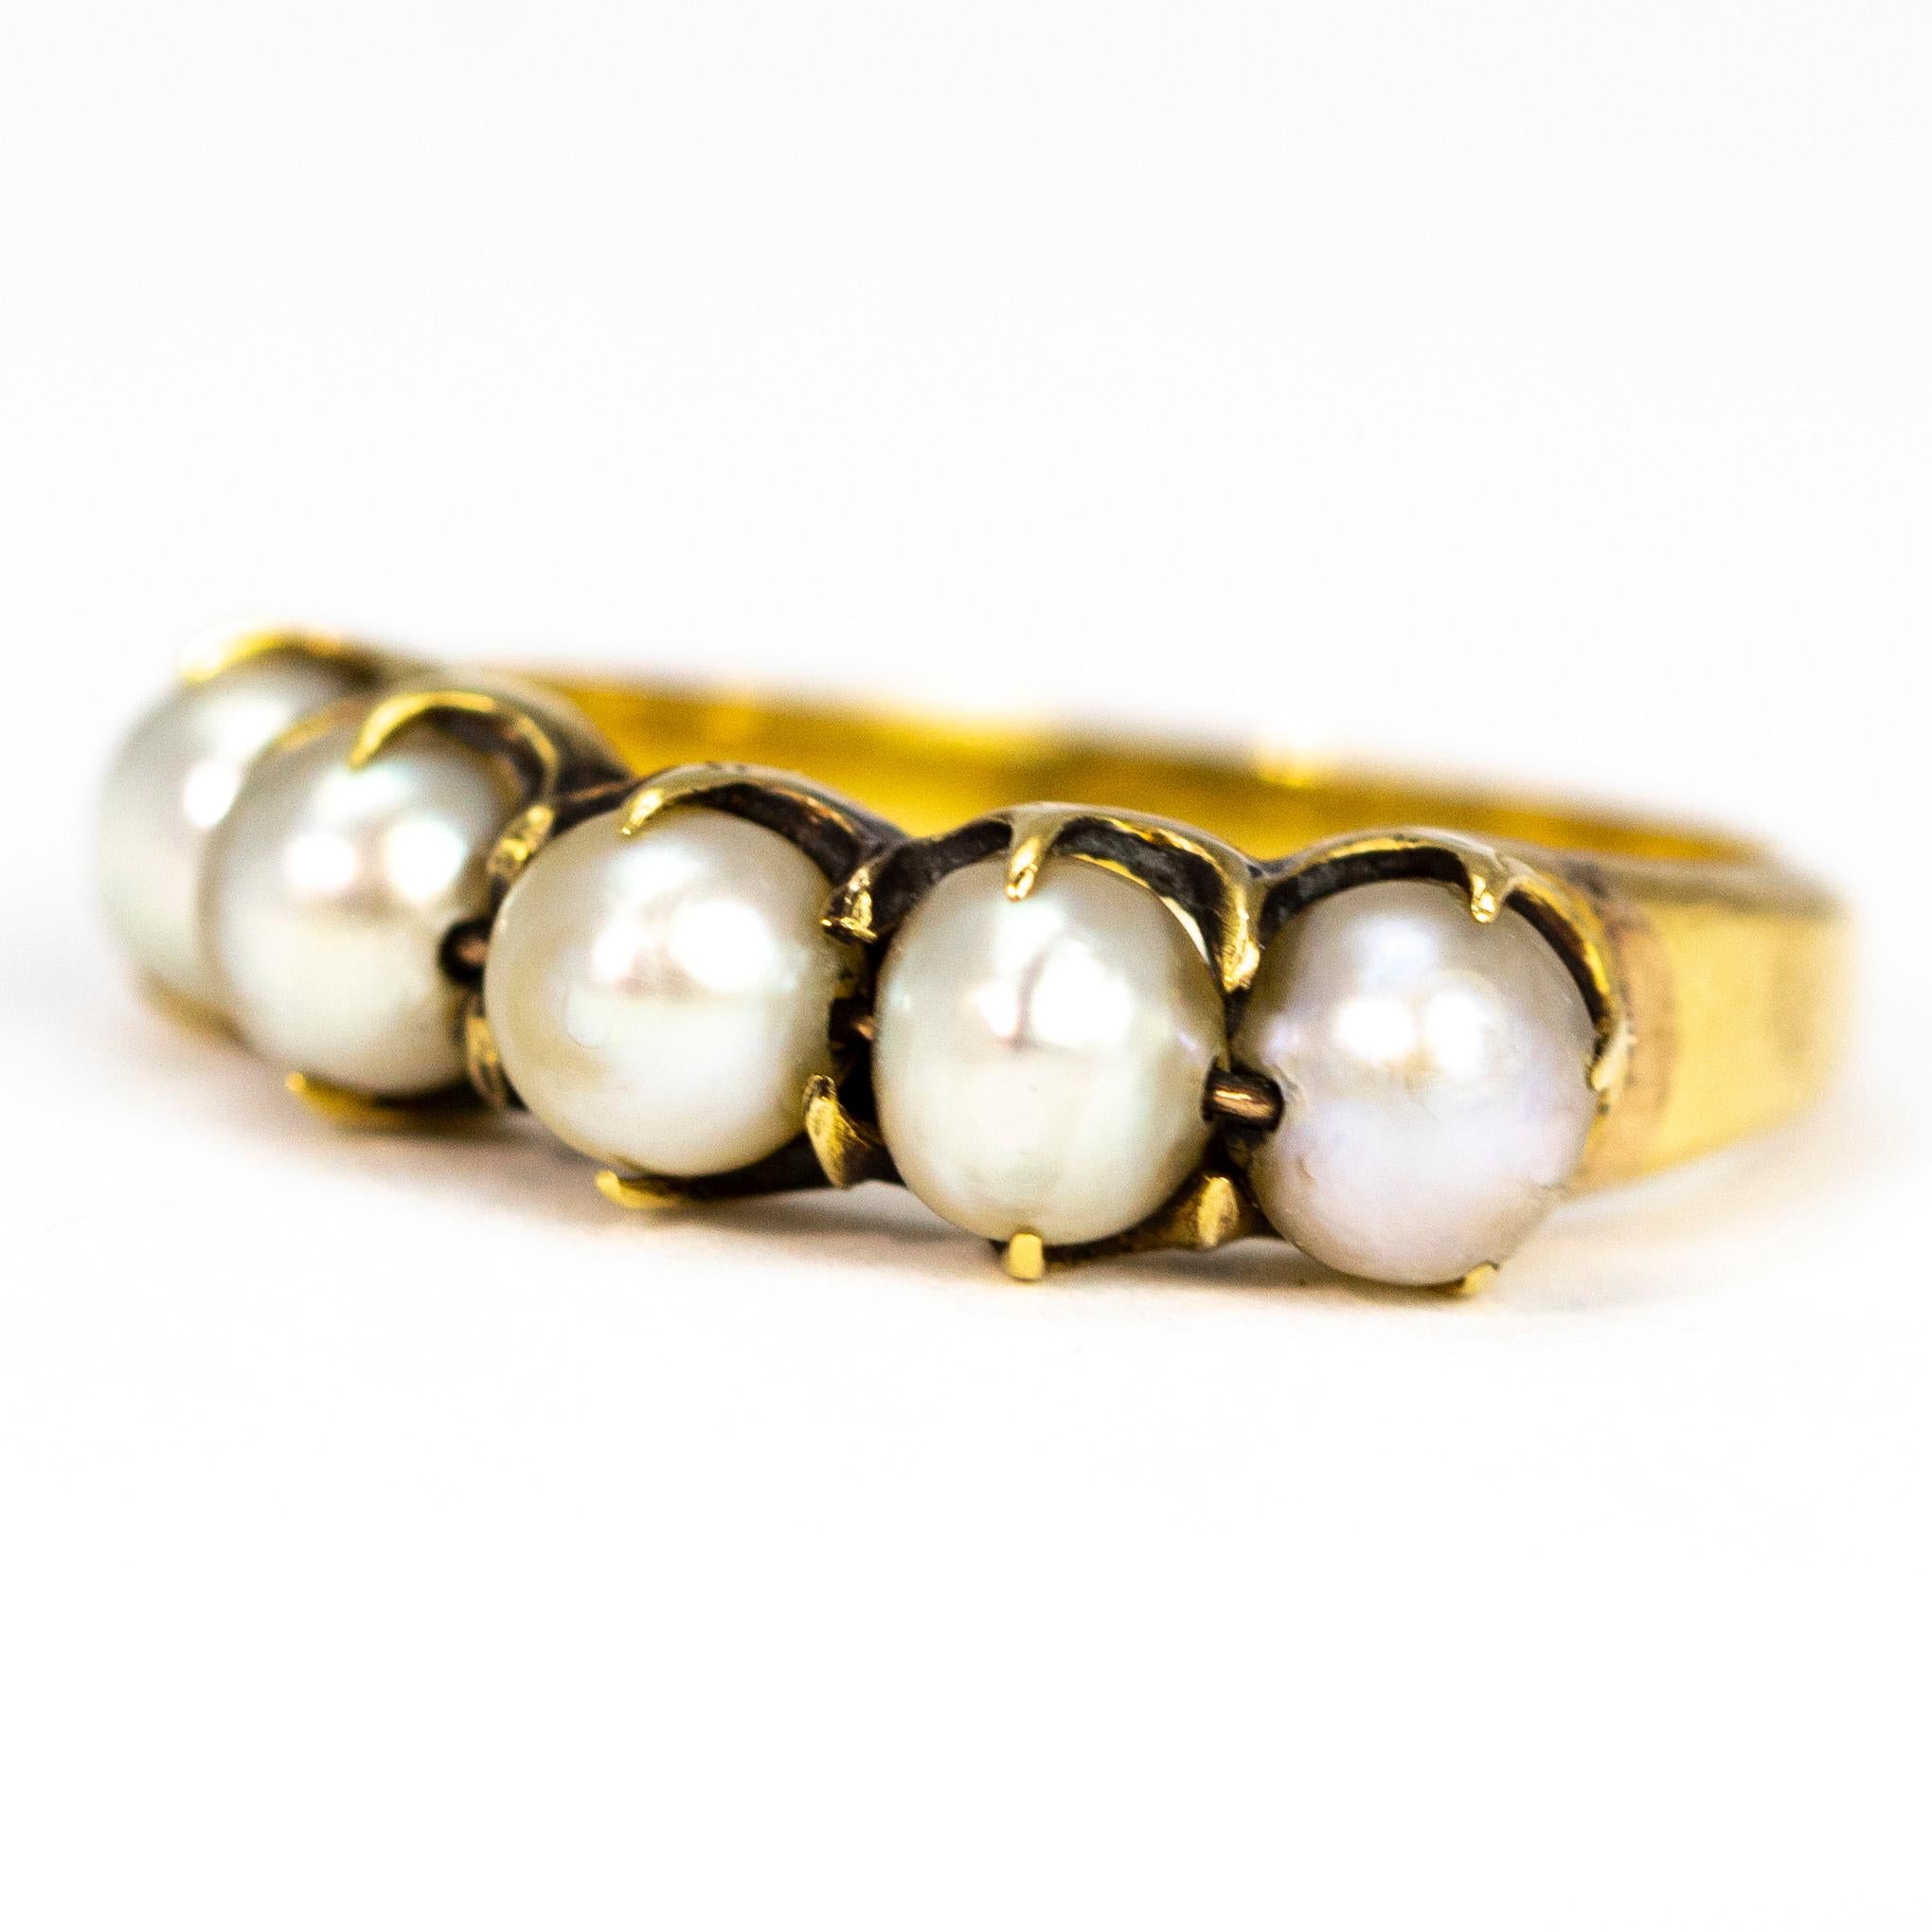 The simple design of this ring is so pretty, the simple claws hold five beautiful glossy round pearls. The ring is modelled in 18ct gold. 

Ring Size: L or 5 3/4
Band Width: 5.5mm

Weight: 3.5g